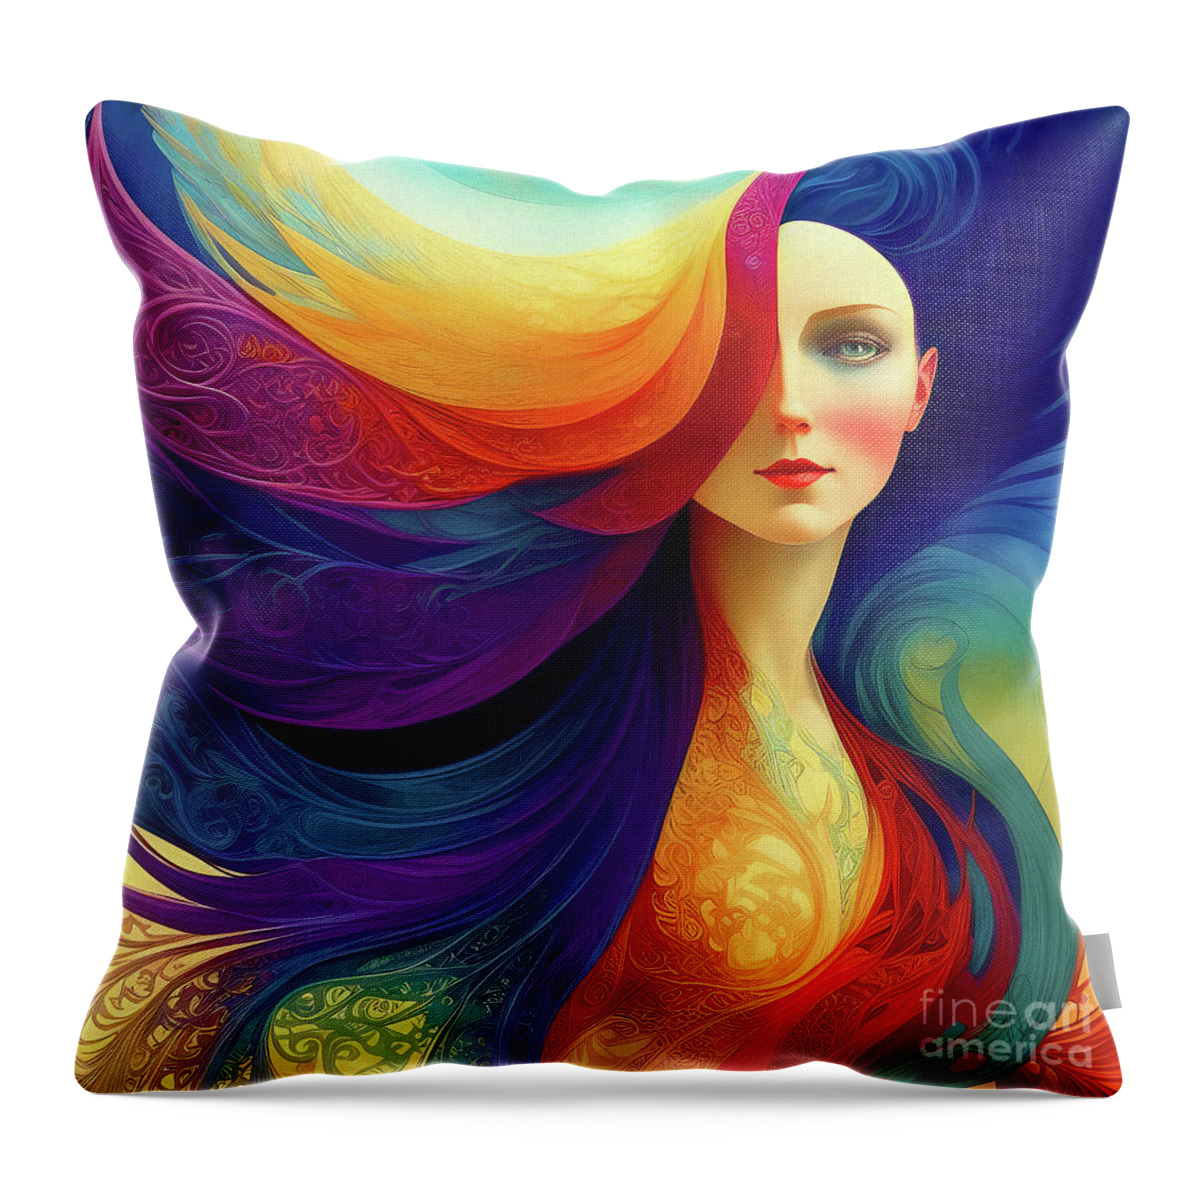  Throw Pillow featuring the digital art Once in a Dream by Vicki Pelham